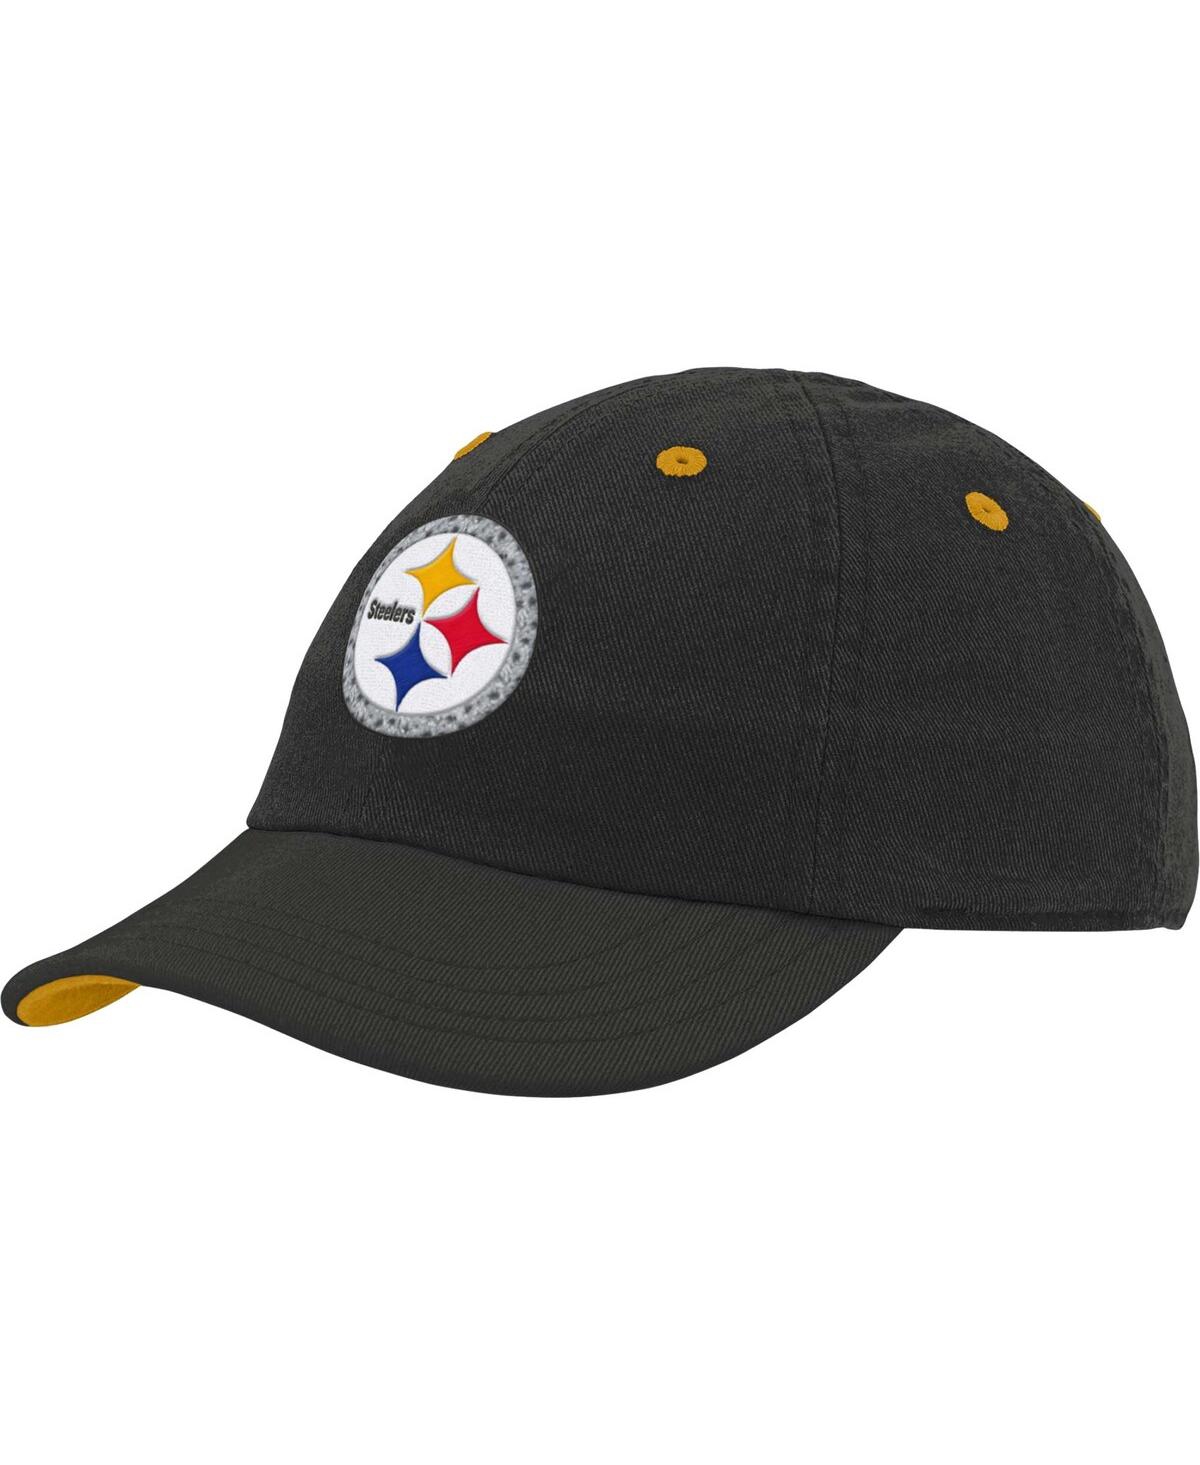 Outerstuff Babies' Infant Boys And Girls Black Pittsburgh Steelers Team Slouch Flex Hat